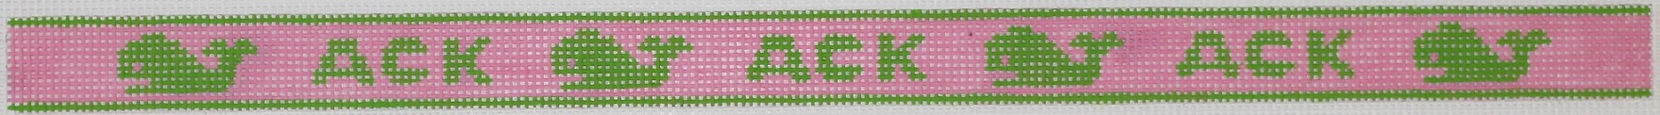 Sunglass Strap – ACK & Whales – bright green on pink (Nantucket)